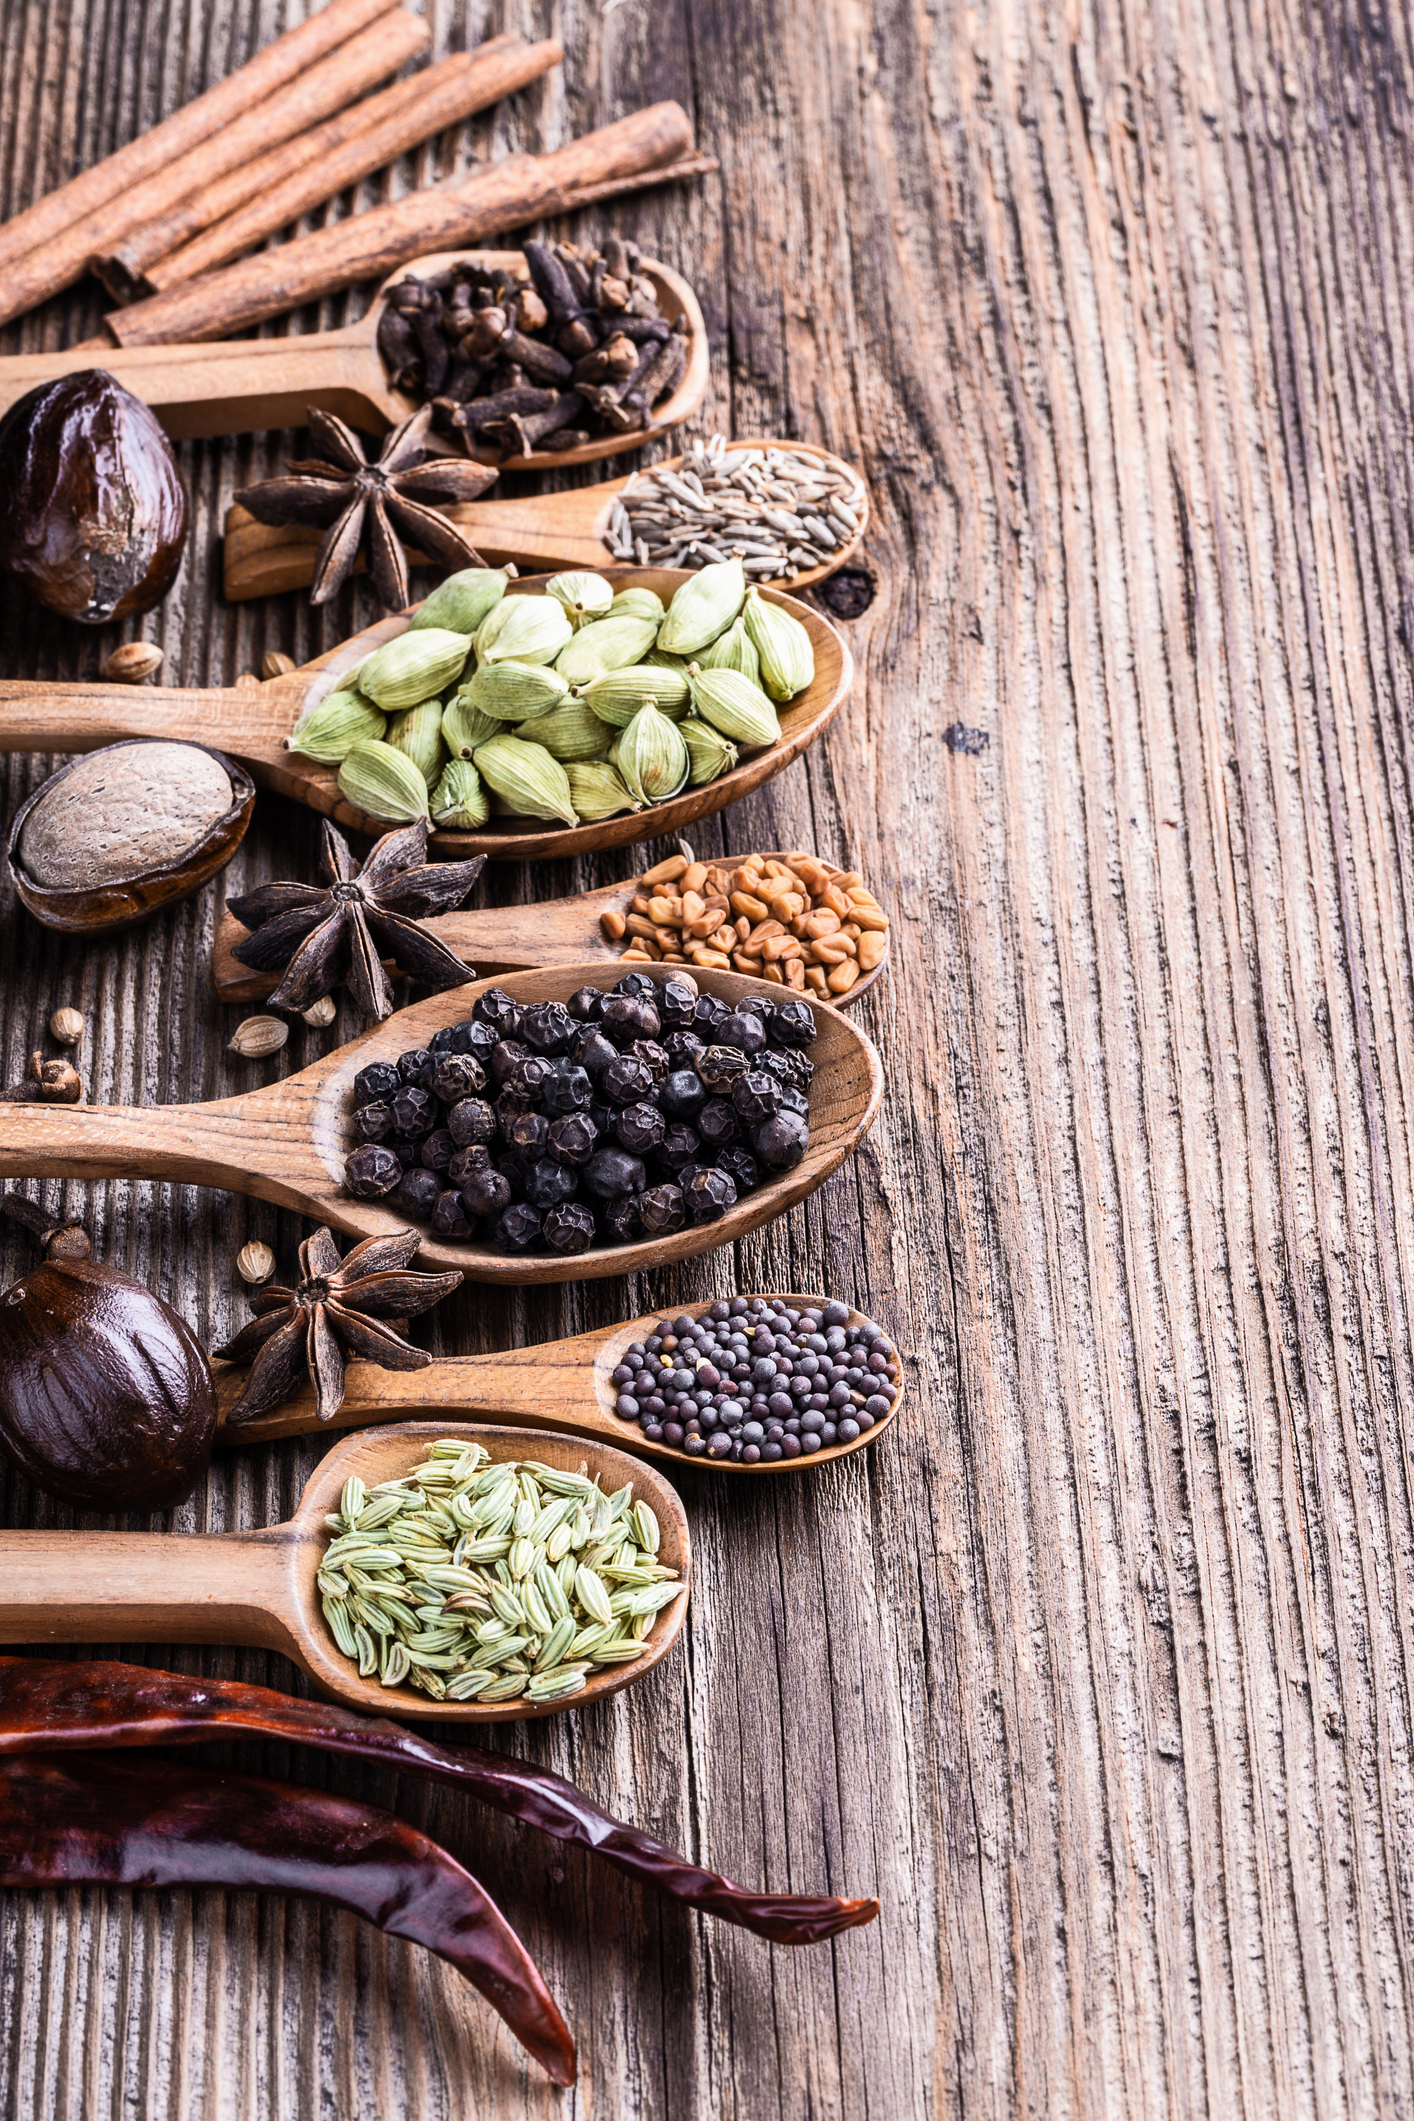 Different types of whole Indian spices in wooden background close-up.